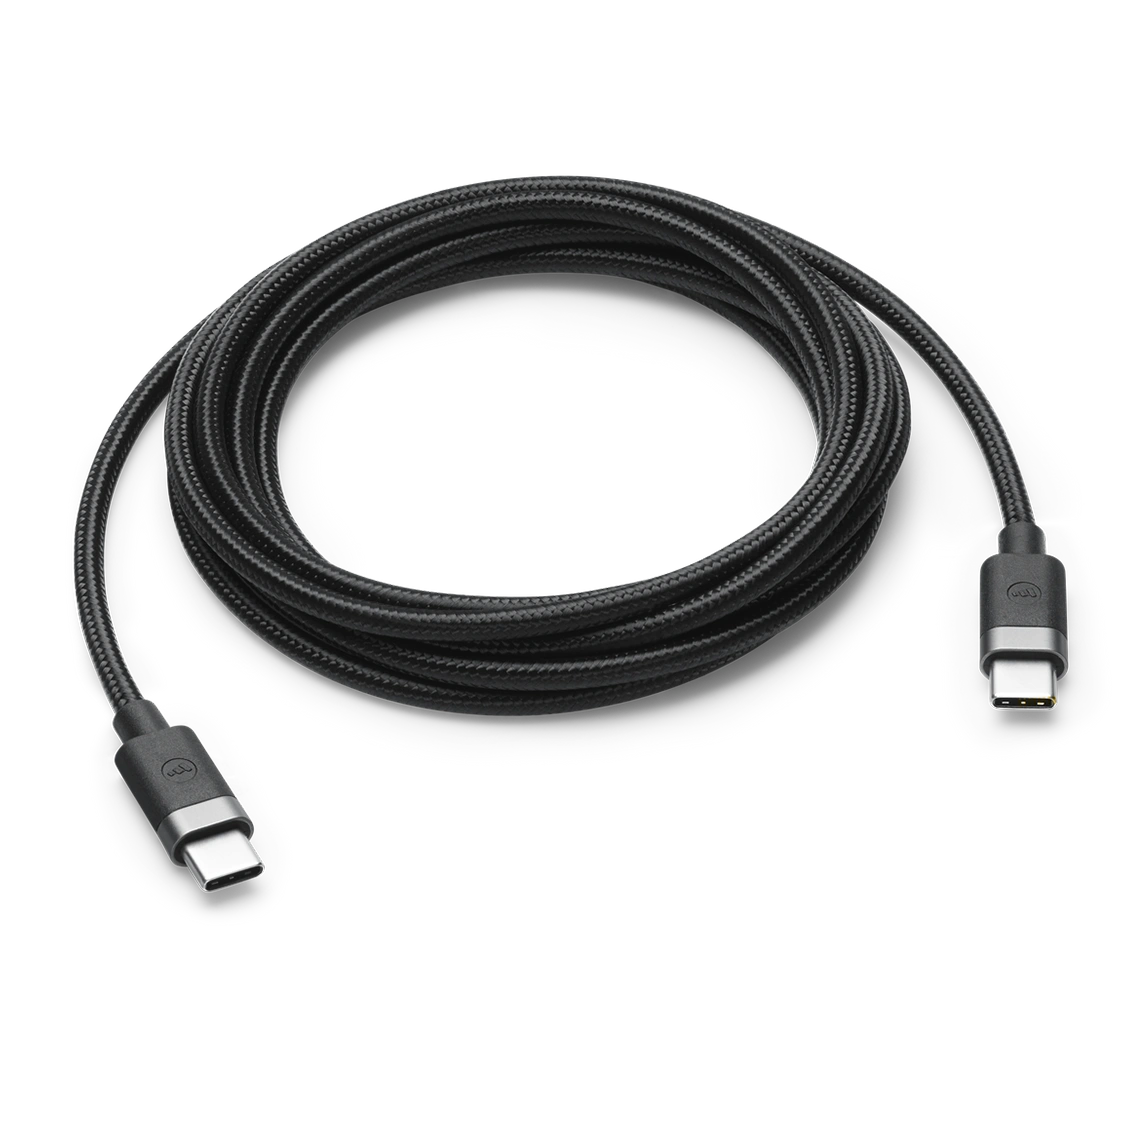 mophie-usb-c-to-usb-c-cable-1-5m